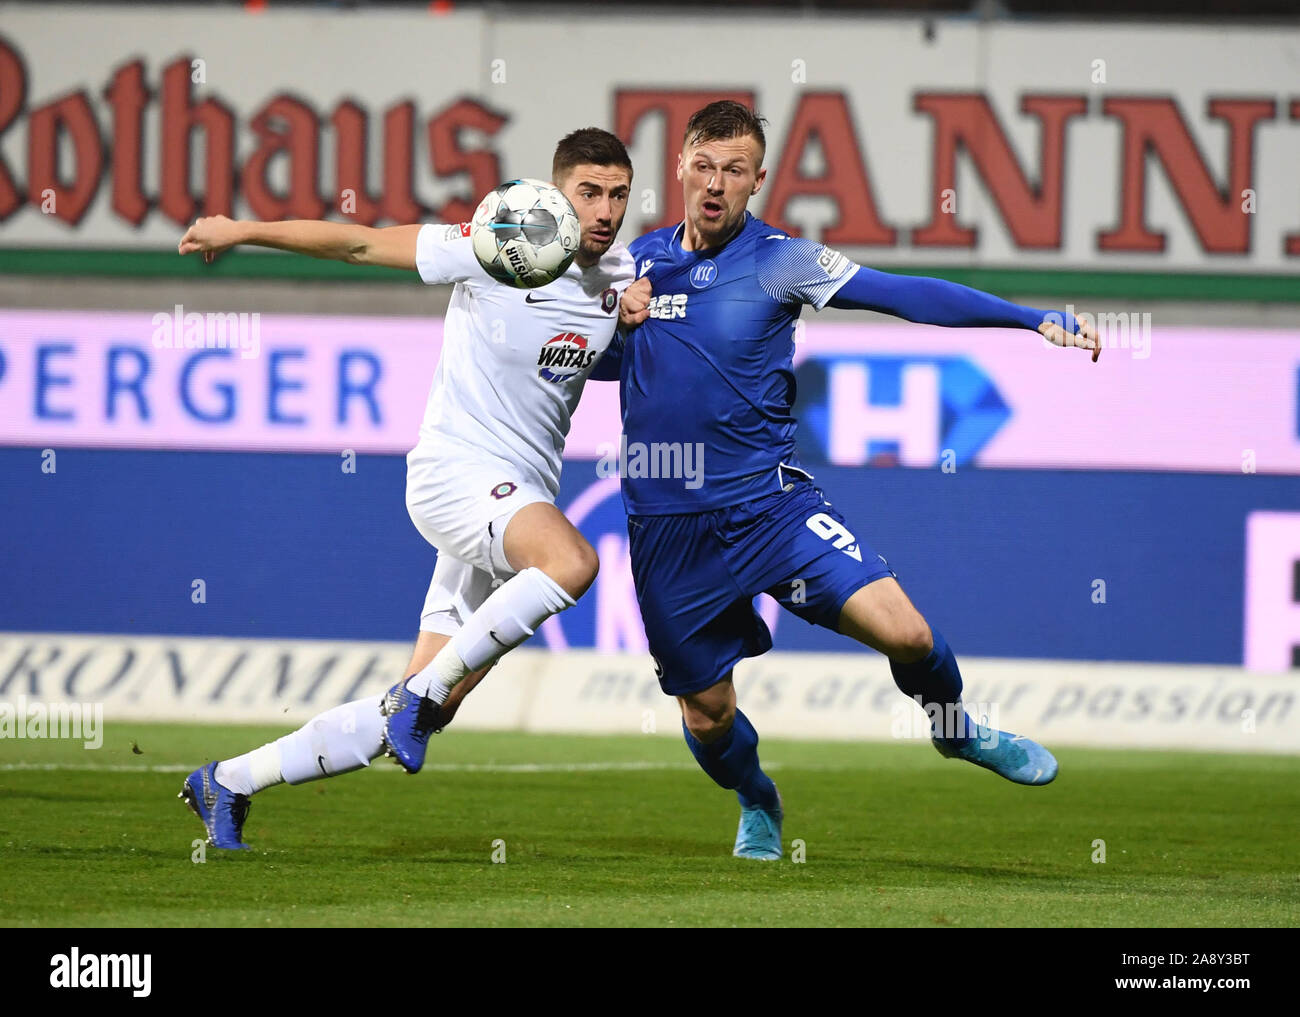 Karlsruhe, Germany. 11th Nov, 2019. Soccer: 2nd Bundesliga, Karlsruher SC - Erzgebirge Aue, 13th matchday in the Wildparkstadion. Marvin Pourie (r) from Karlsruhe and Marko Mihojevic from Auer fight for the ball. Credit: Uli Deck/dpa - IMPORTANT NOTE: In accordance with the requirements of the DFL Deutsche Fußball Liga or the DFB Deutscher Fußball-Bund, it is prohibited to use or have used photographs taken in the stadium and/or the match in the form of sequence images and/or video-like photo sequences./dpa/Alamy Live News Stock Photo